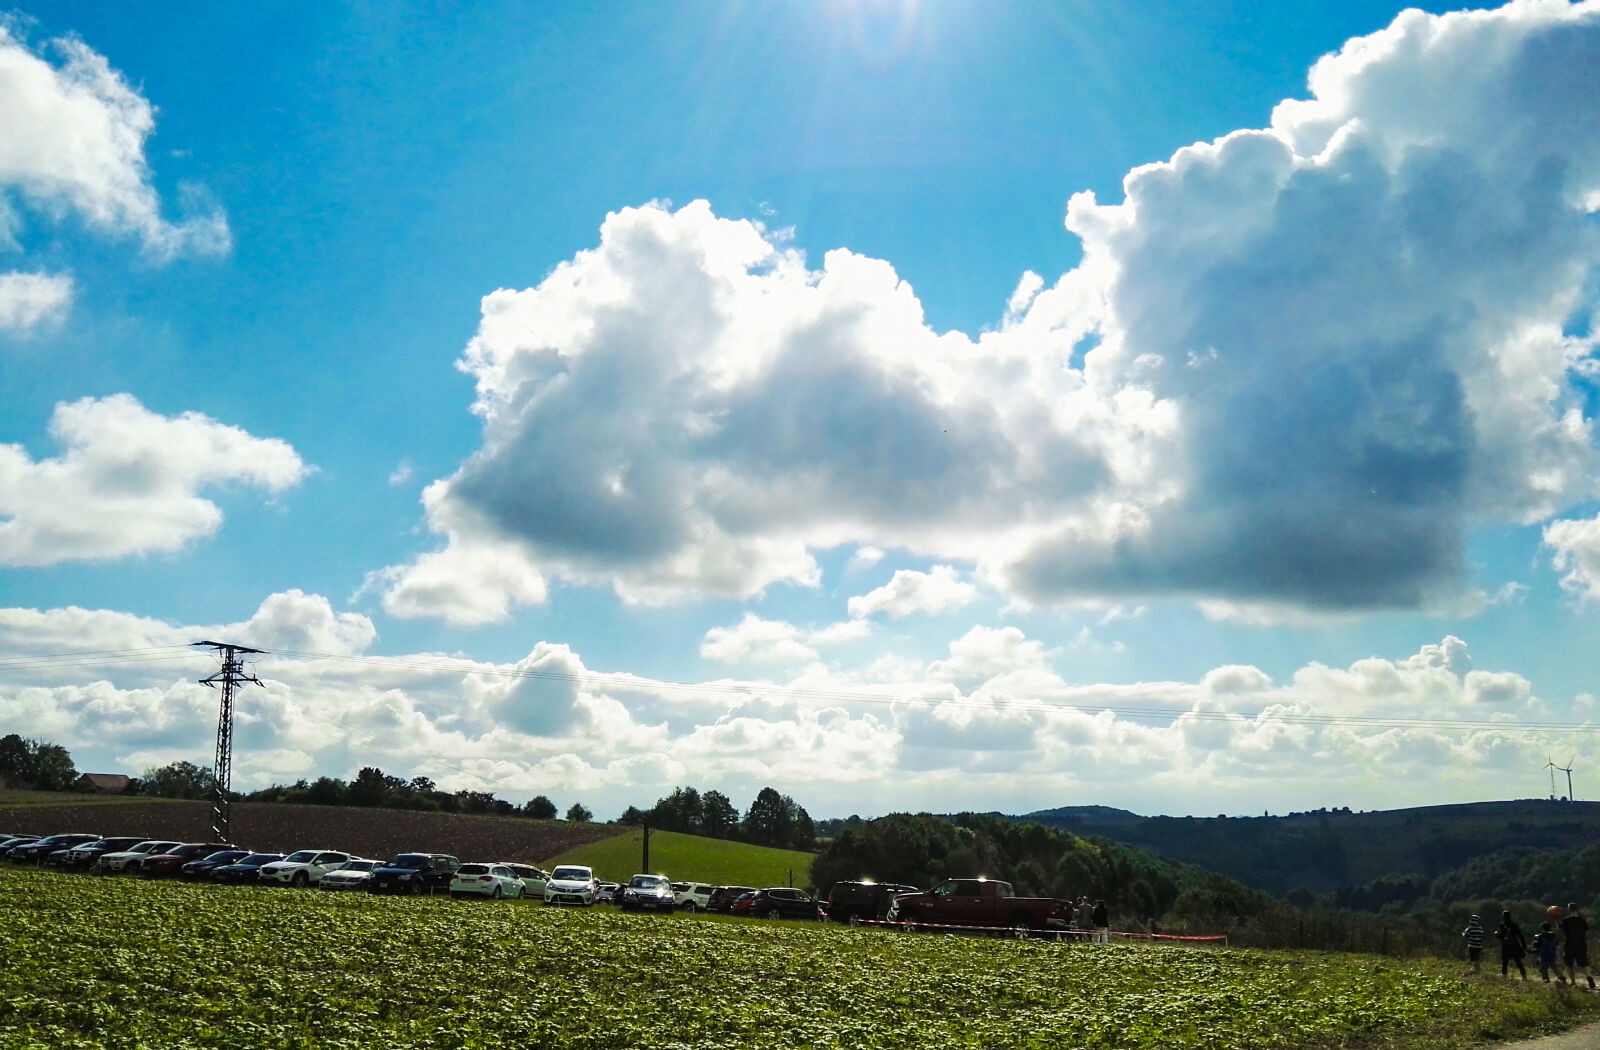 HUAWEI P8 sample photo. Cars, clouds, fall, field photography